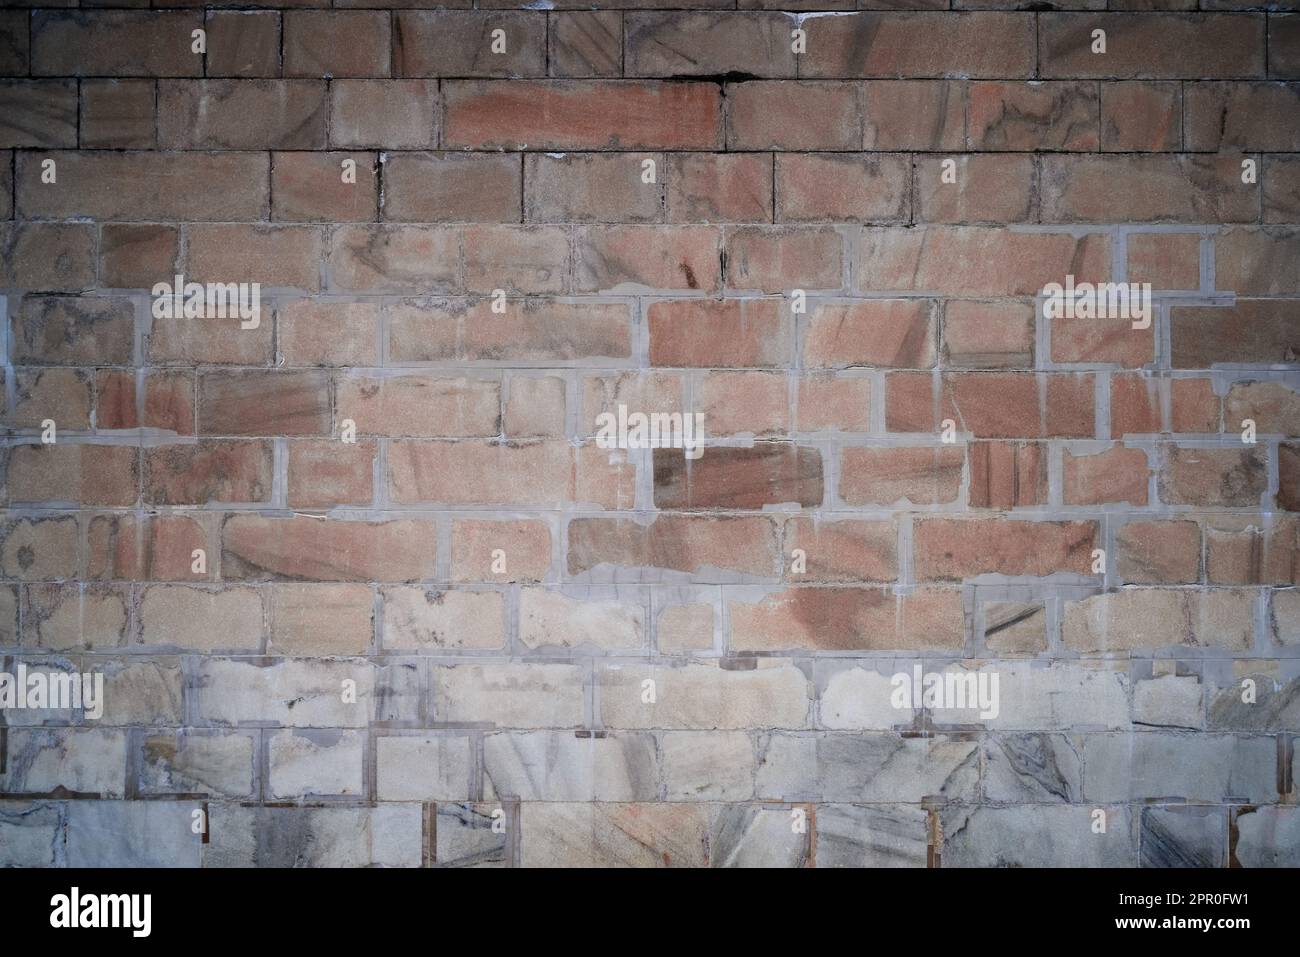 chiseled stone brick texture material, high